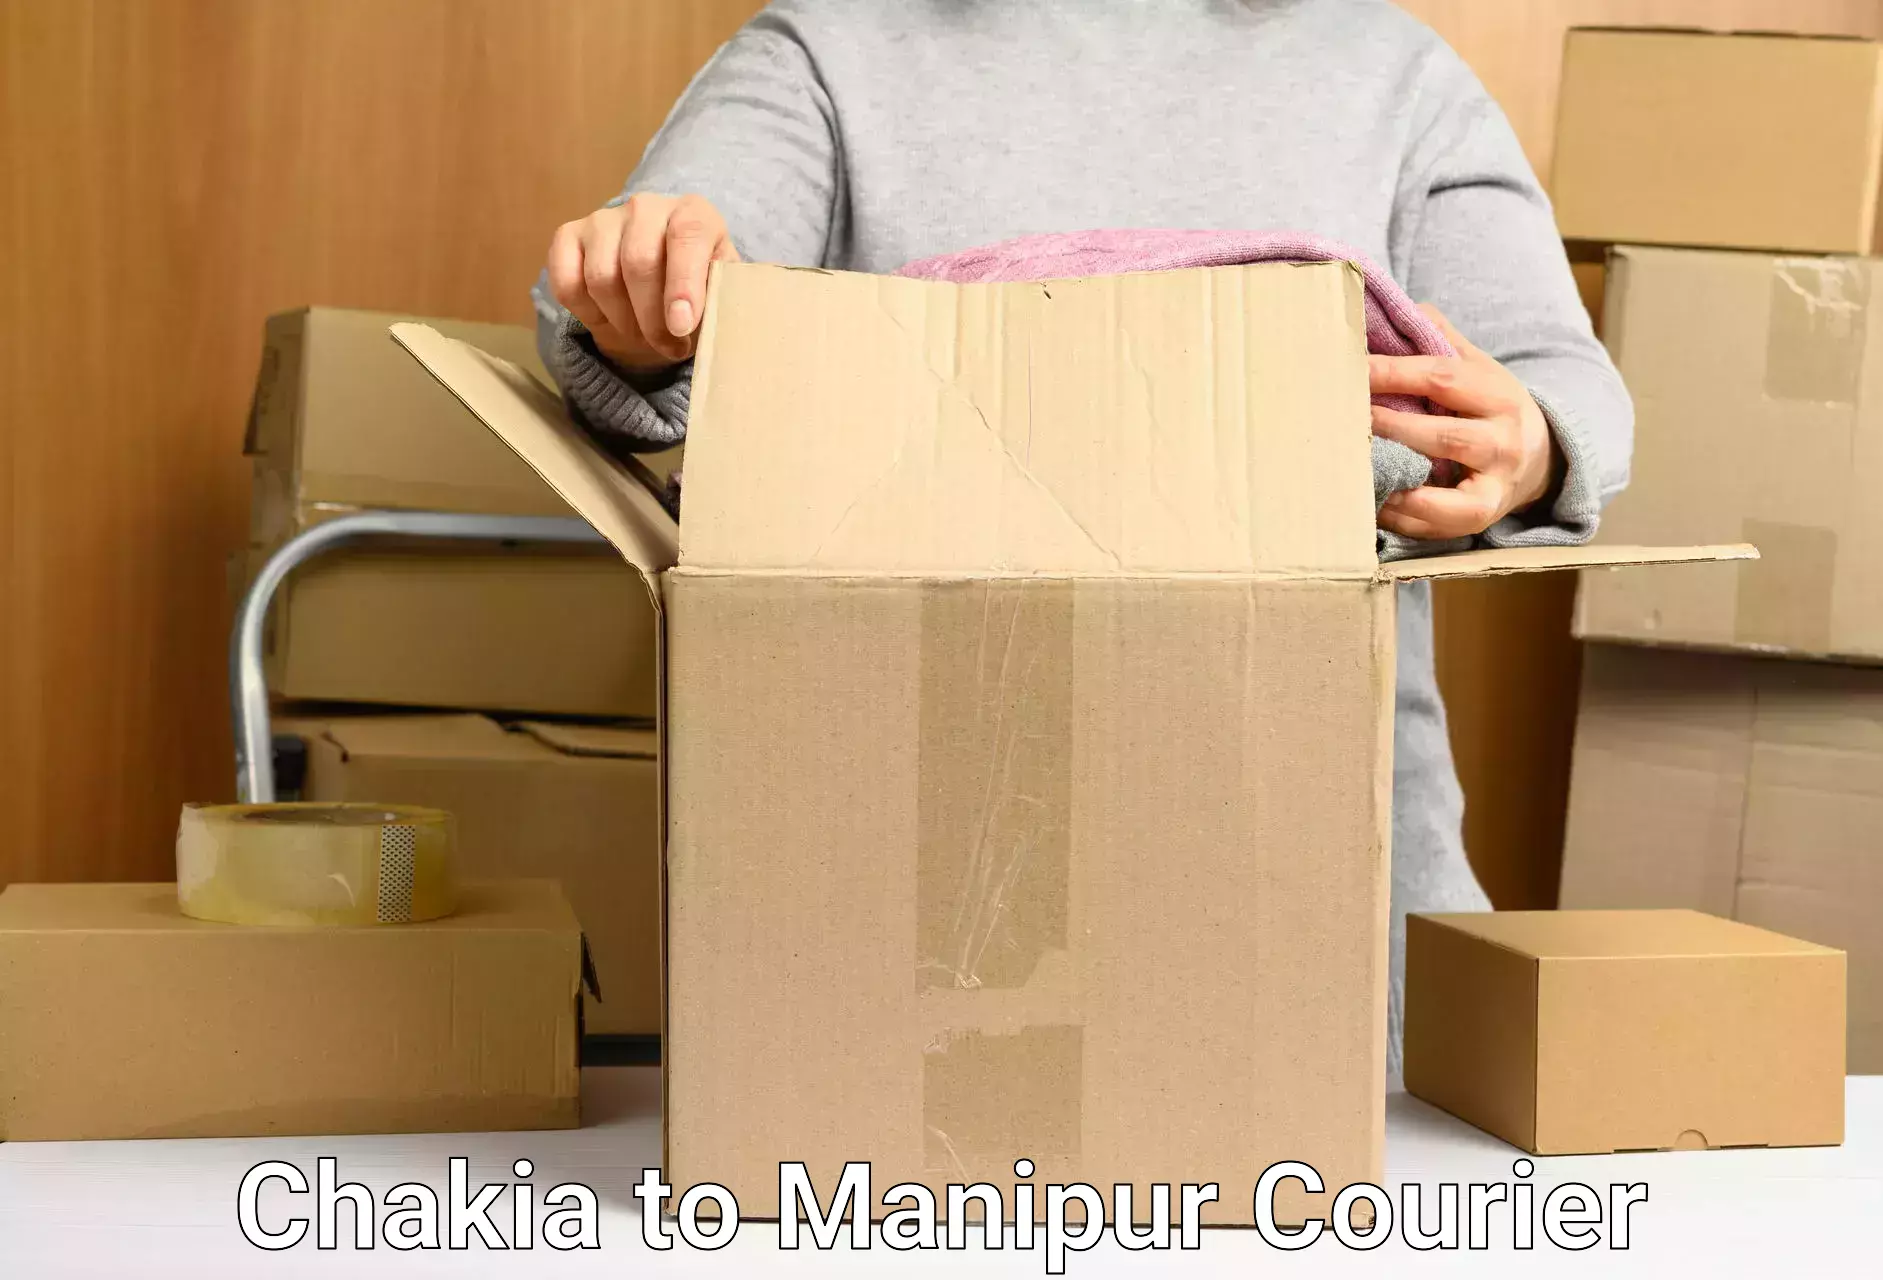 Express mail service Chakia to Manipur